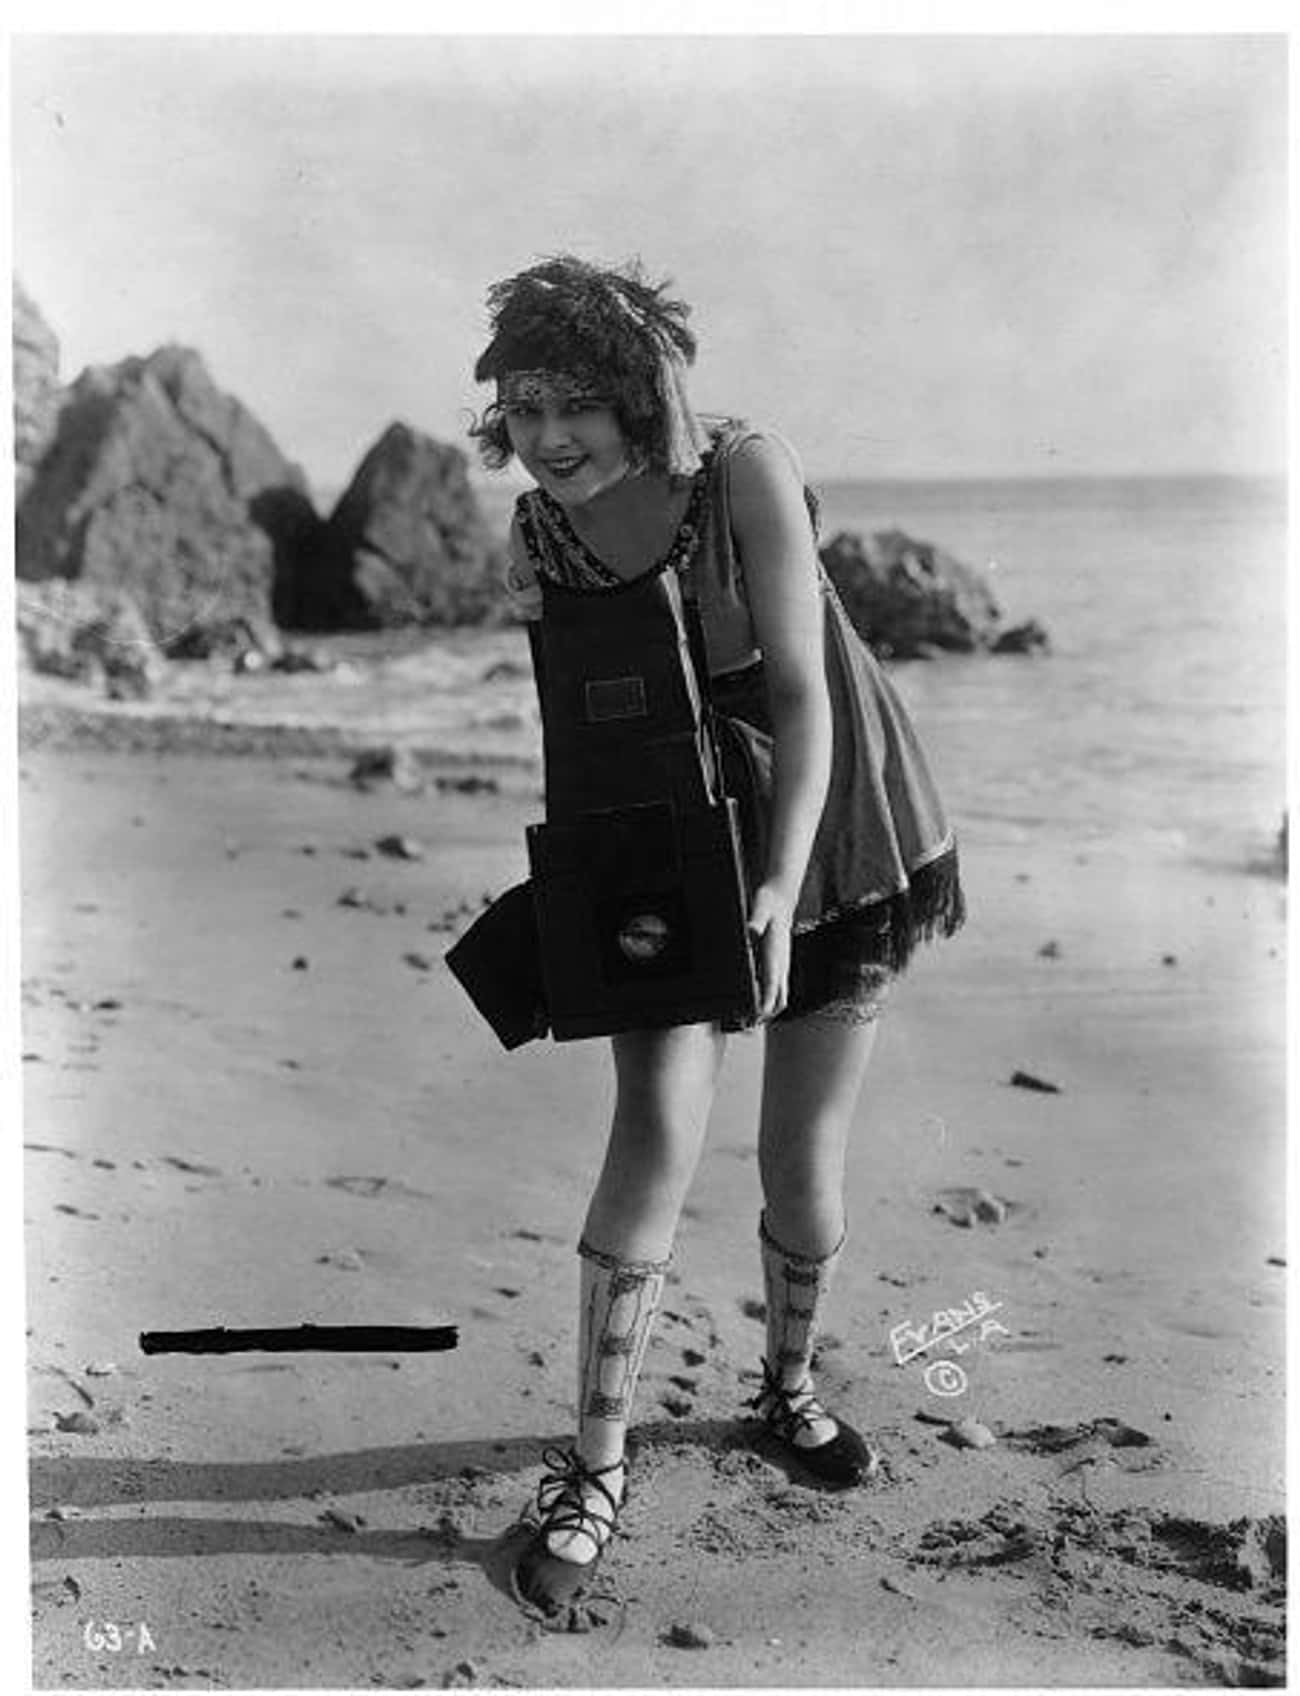 Actress Myrtle Linds Holding A Kodak Graflex Camera At The Beach In Los Angeles, 1919